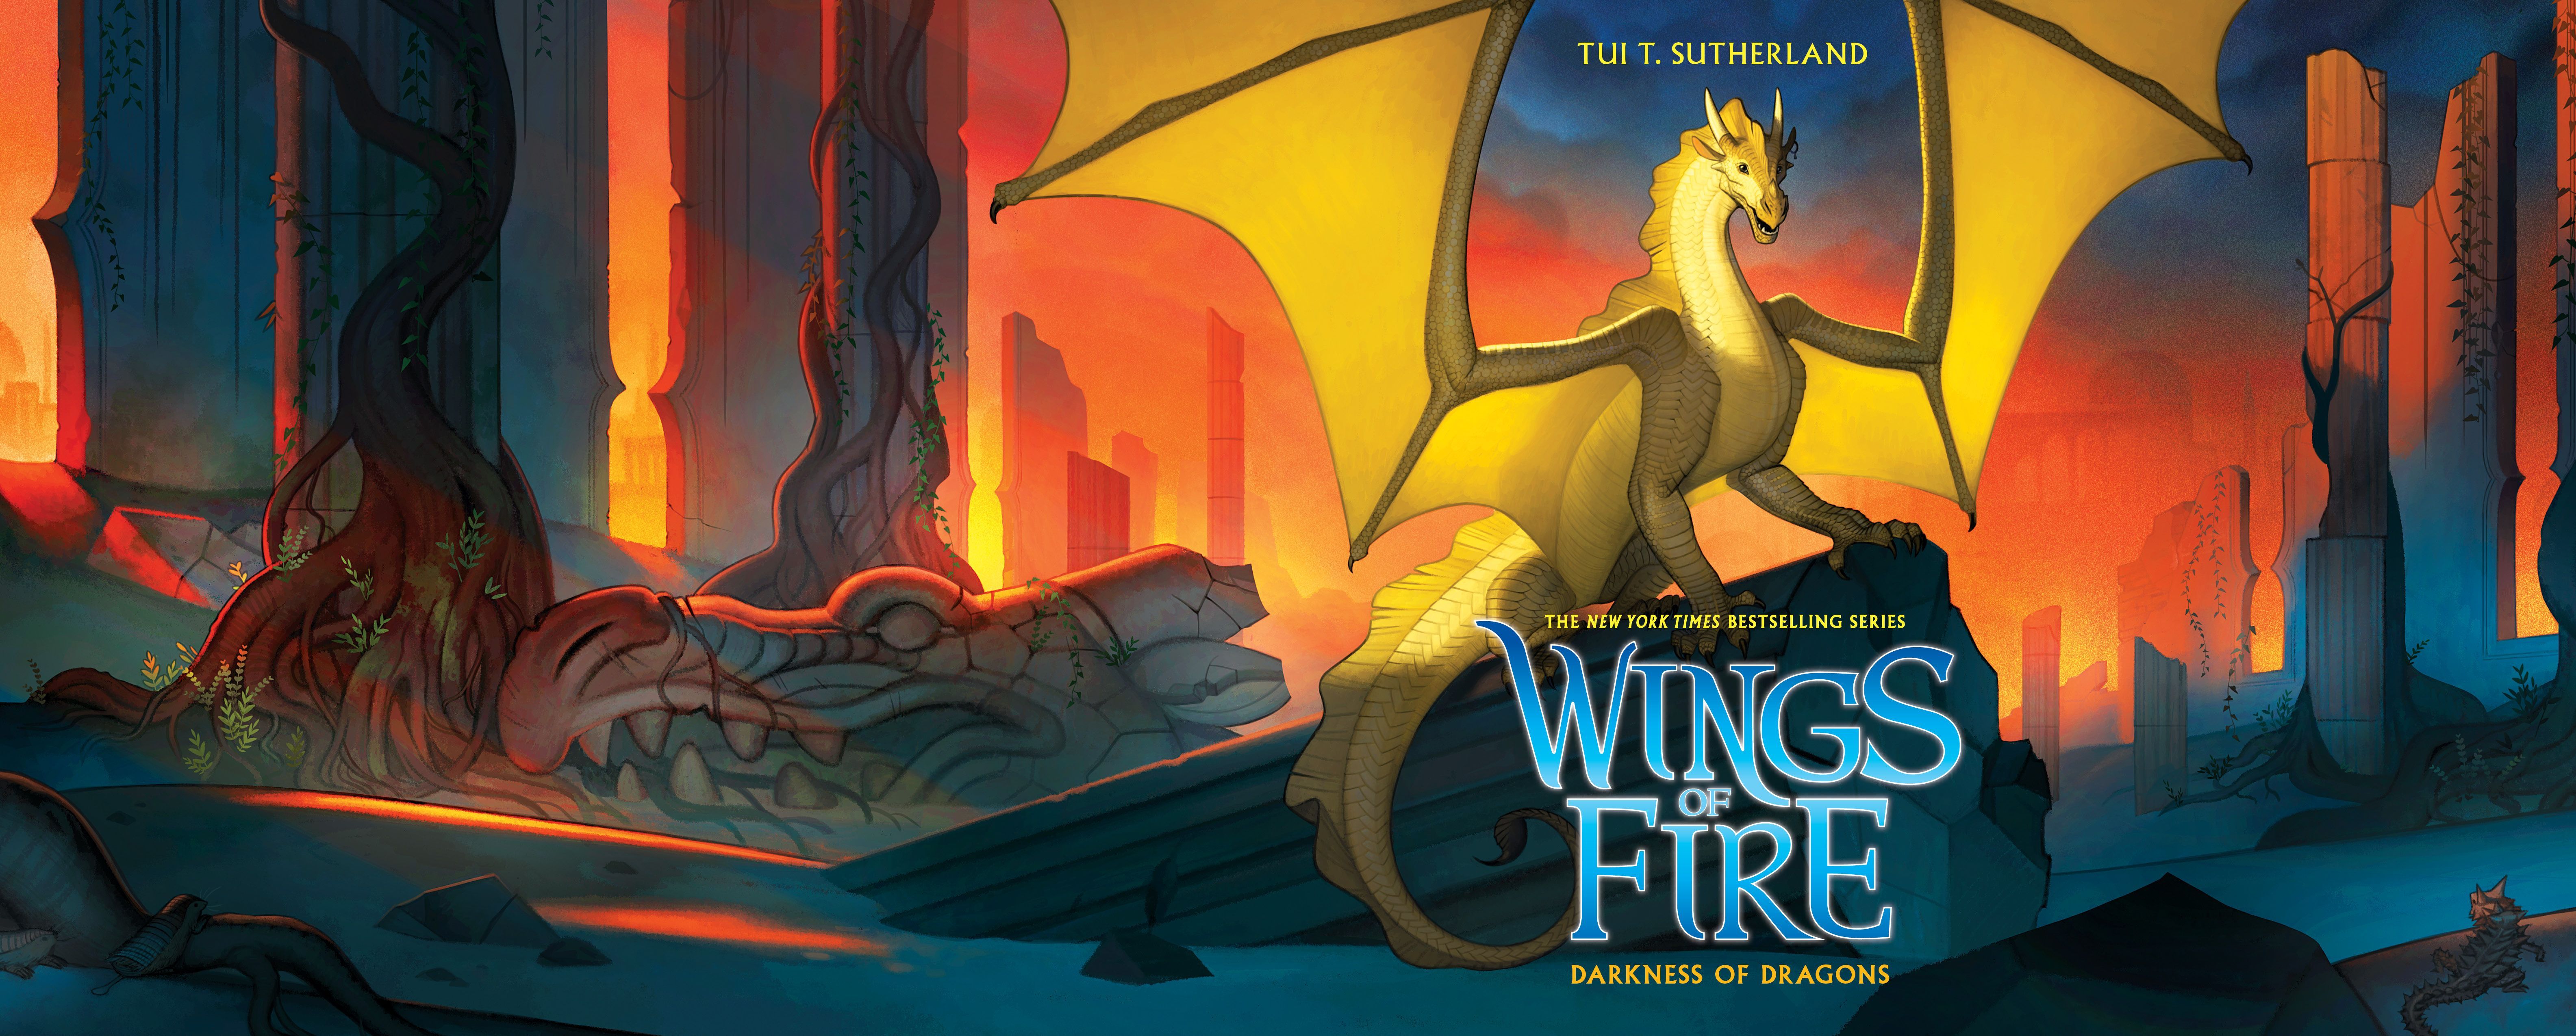 Wings Of Fire Qibli Wallpapers - Wallpaper Cave